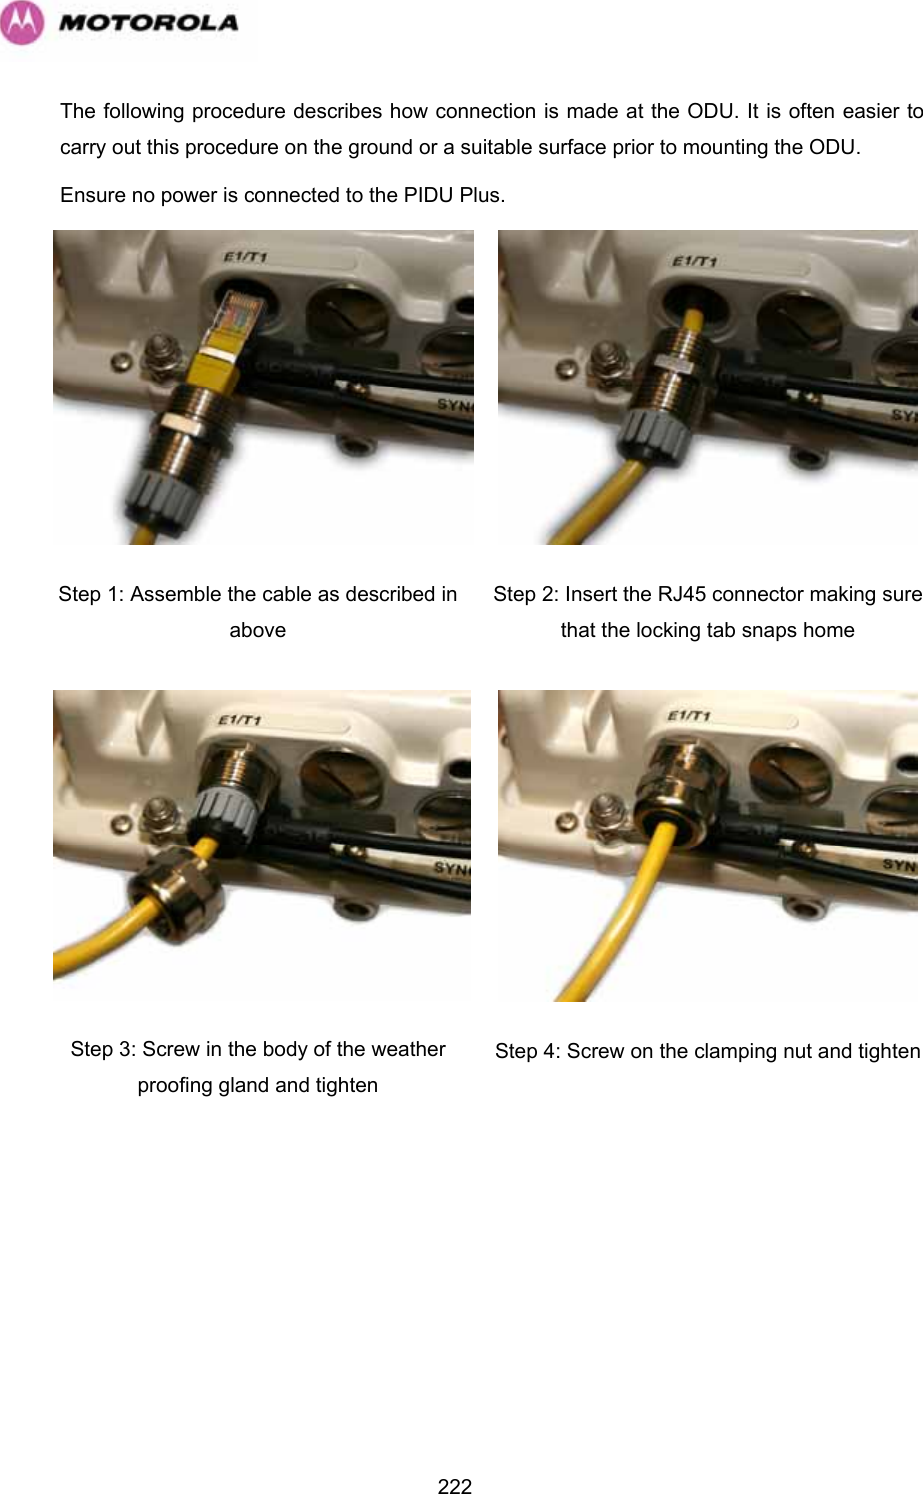   222The following procedure describes how connection is made at the ODU. It is often easier to carry out this procedure on the ground or a suitable surface prior to mounting the ODU.  Ensure no power is connected to the PIDU Plus.  Step 1: Assemble the cable as described in above  Step 2: Insert the RJ45 connector making sure that the locking tab snaps home Step 3: Screw in the body of the weather proofing gland and tighten  Step 4: Screw on the clamping nut and tighten 